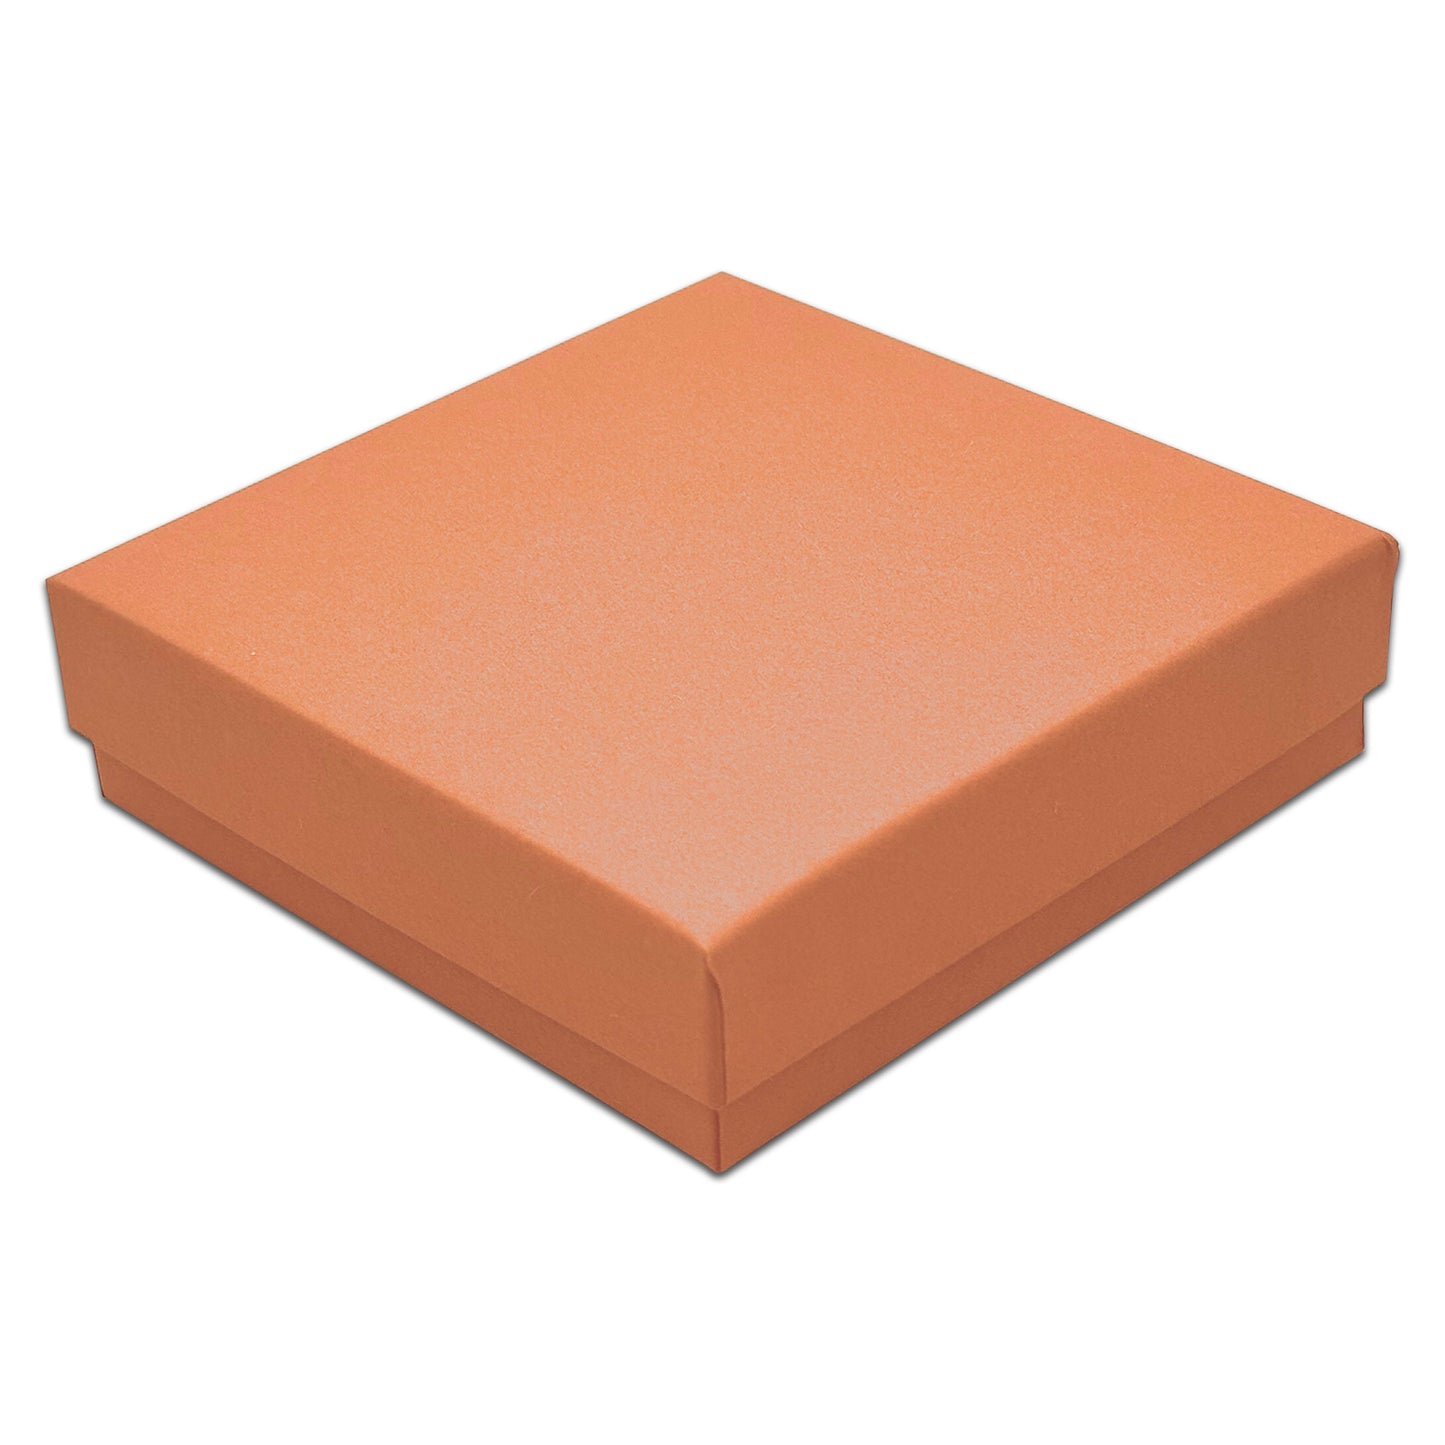 3 1/2" x 3 1/2" x 1" Coral Cotton Filled Paper Box